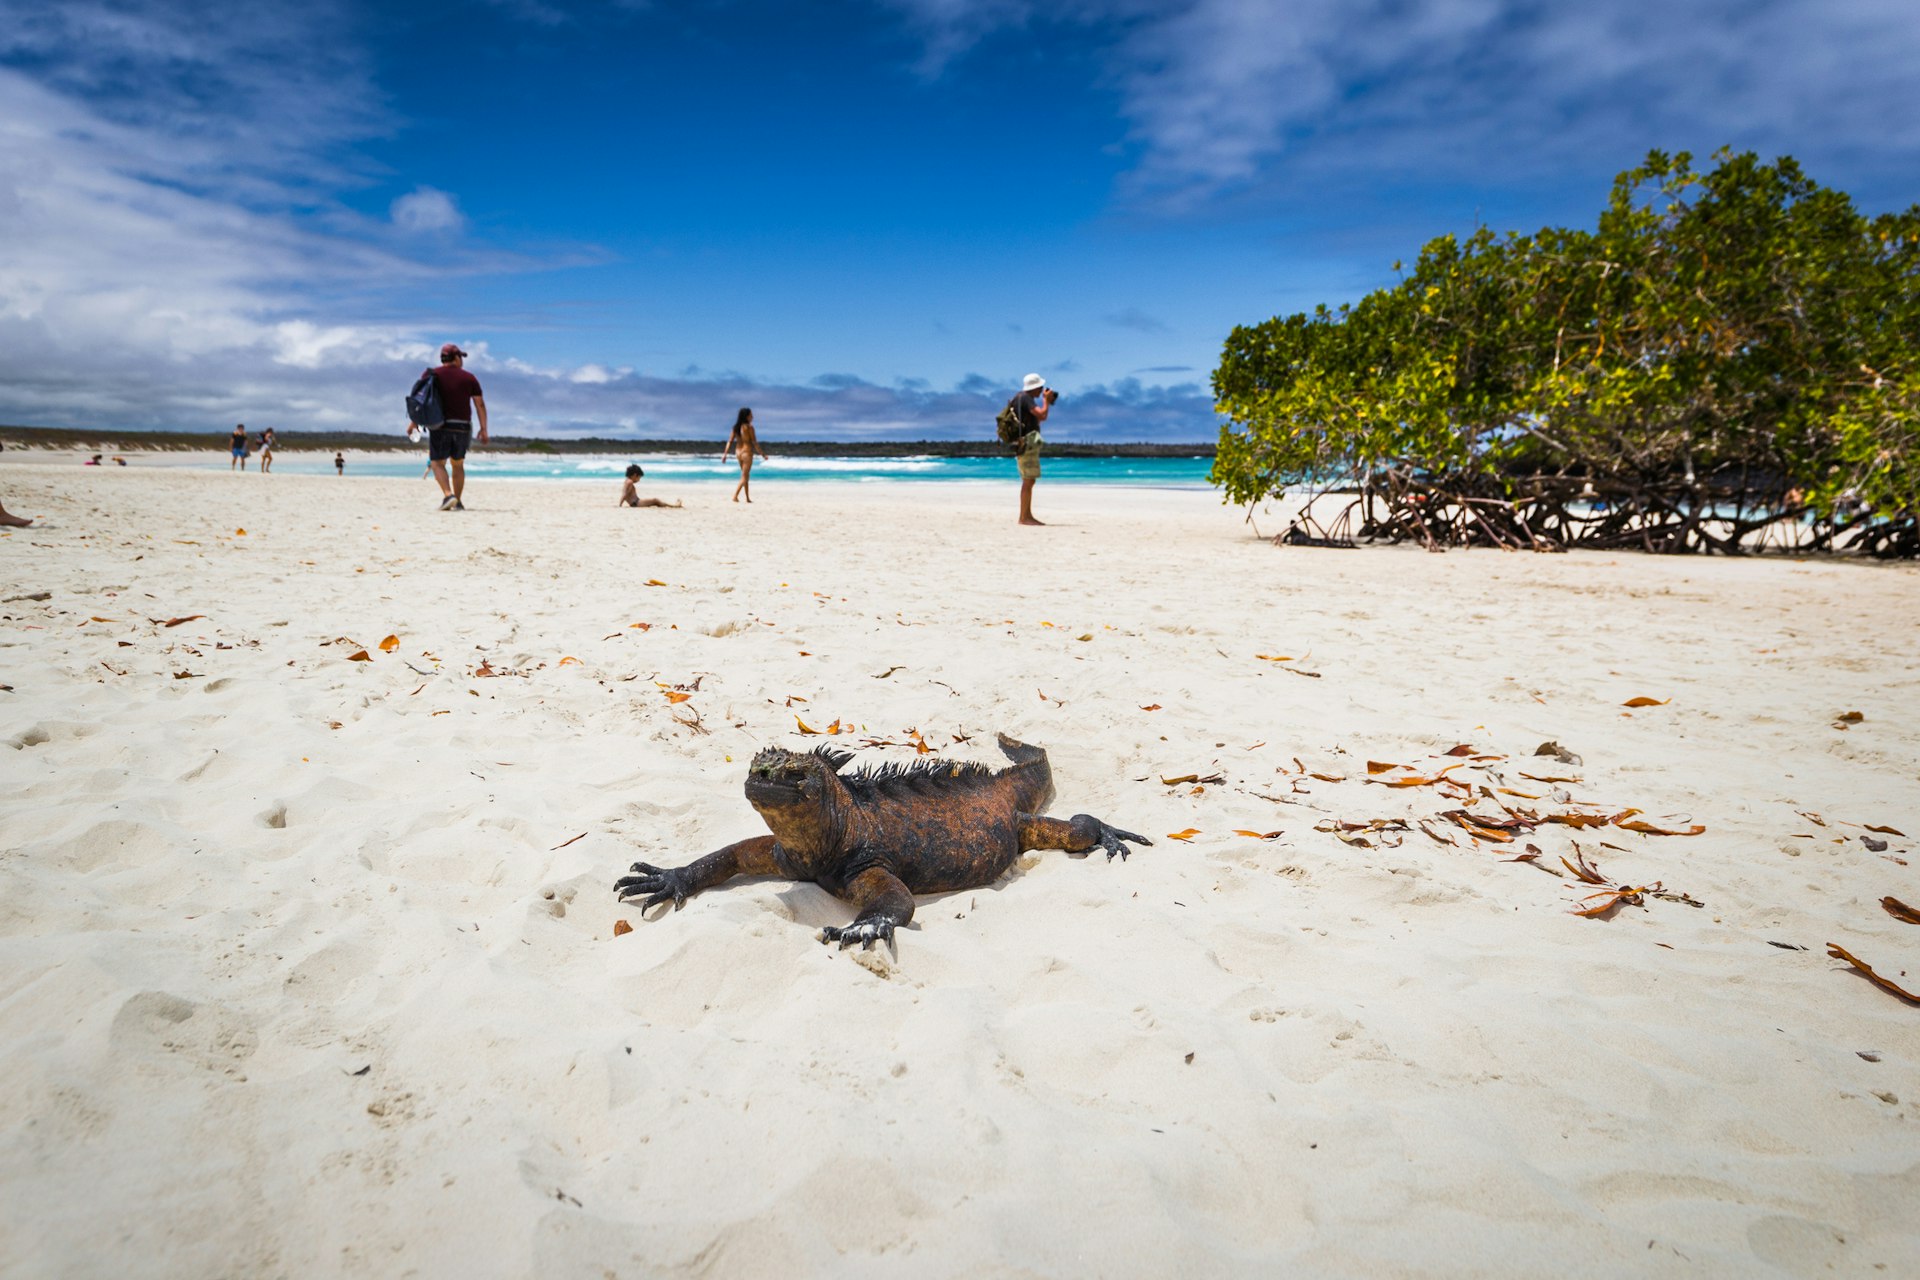 A marine iguana wanders along a white-sand beach as tourists and photographers pass in the background